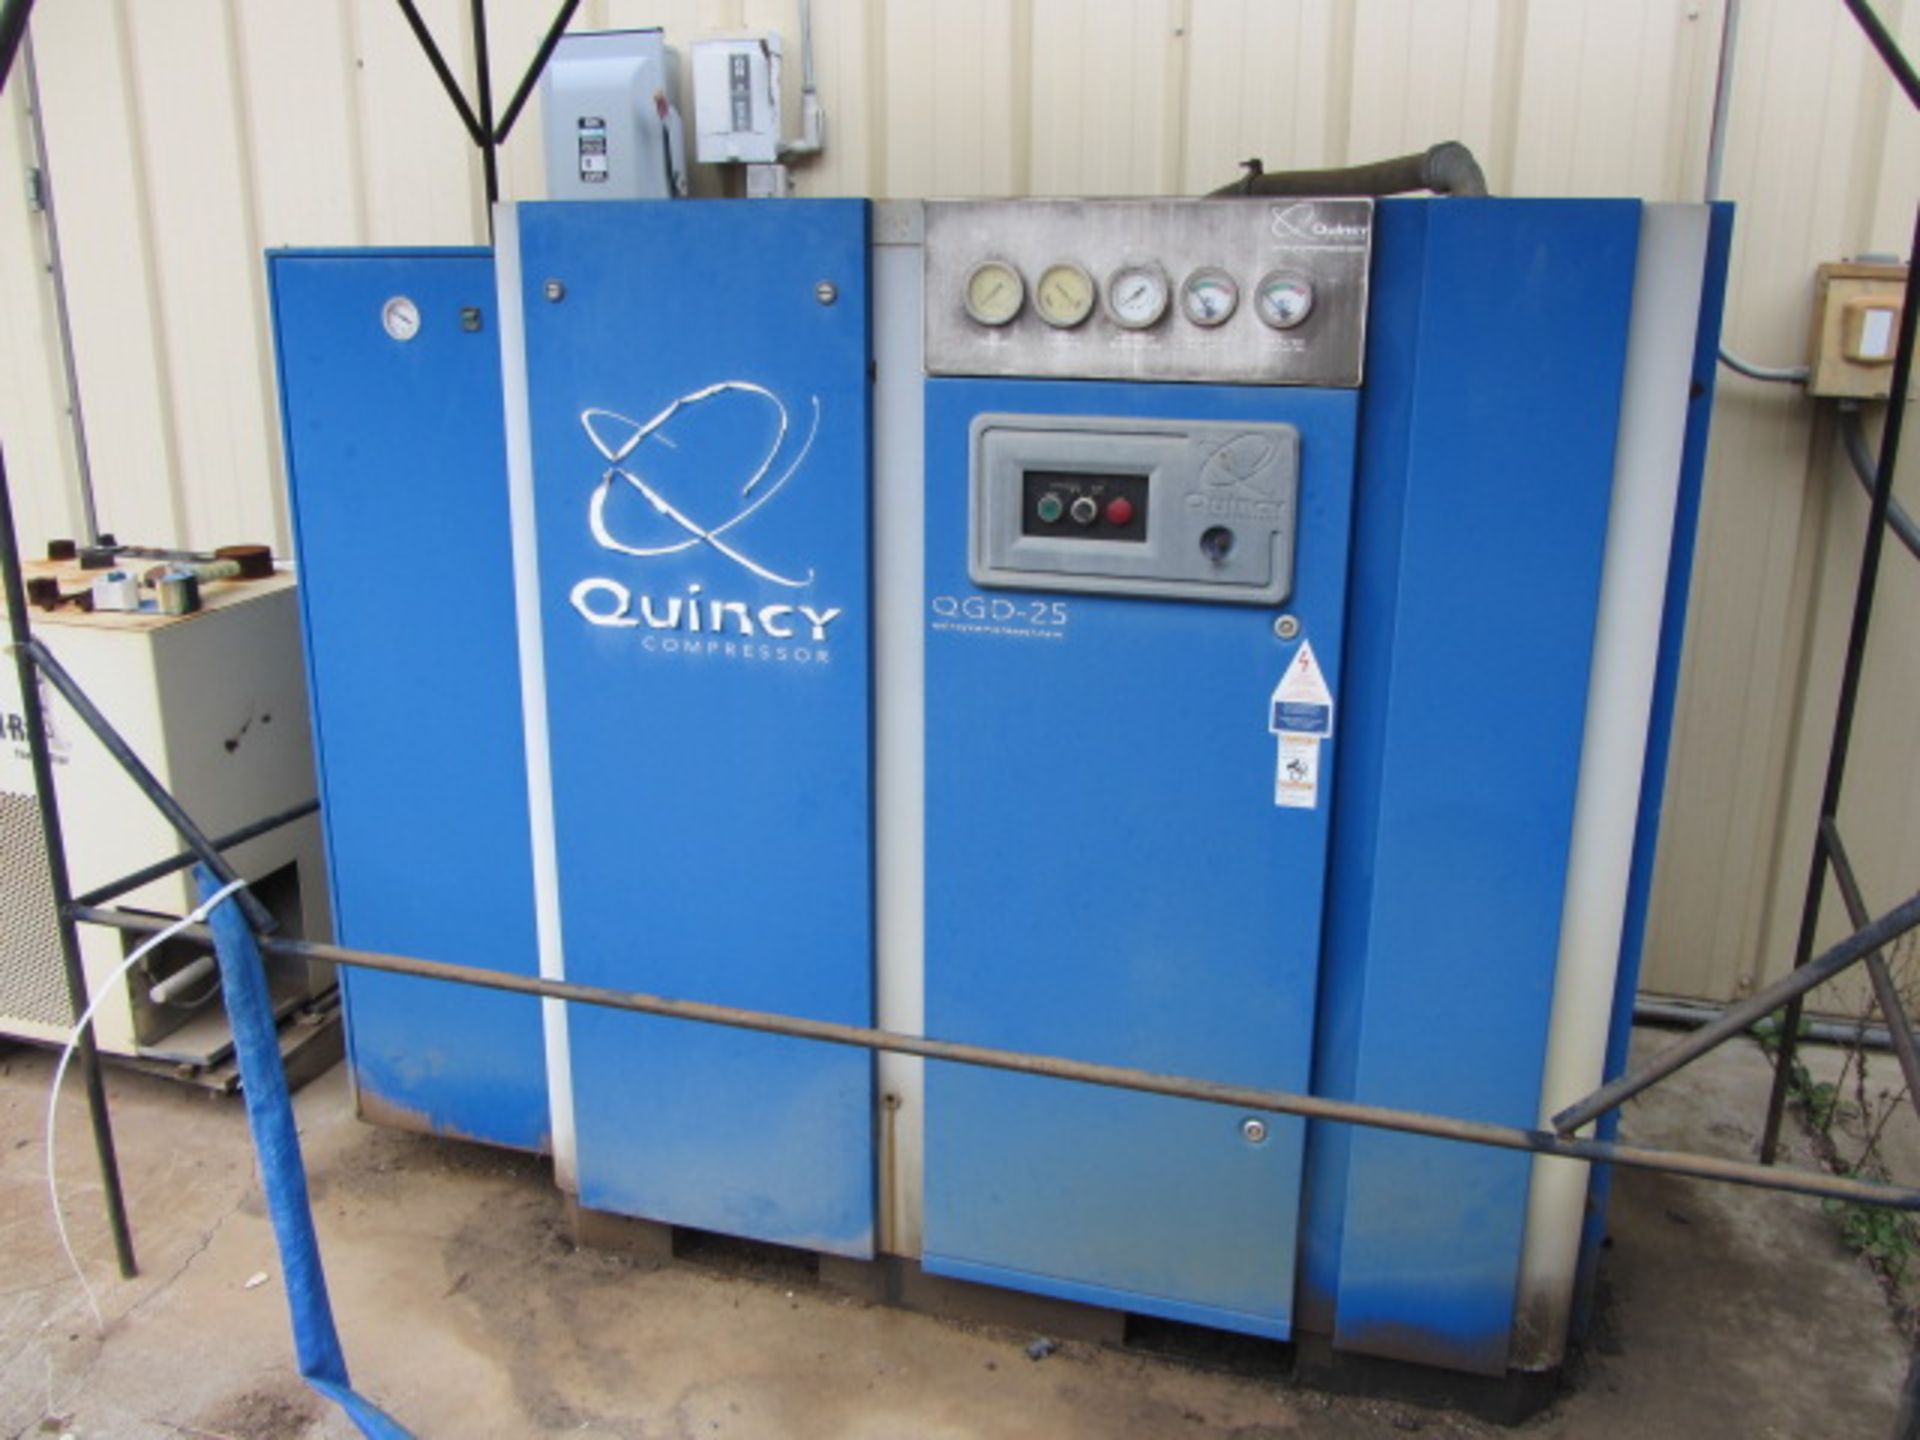 Quincy Model QGD-25 25HP Rotary Screw Air Compressor with Approx 92 CFM, 125 PSIG, Control, sn: